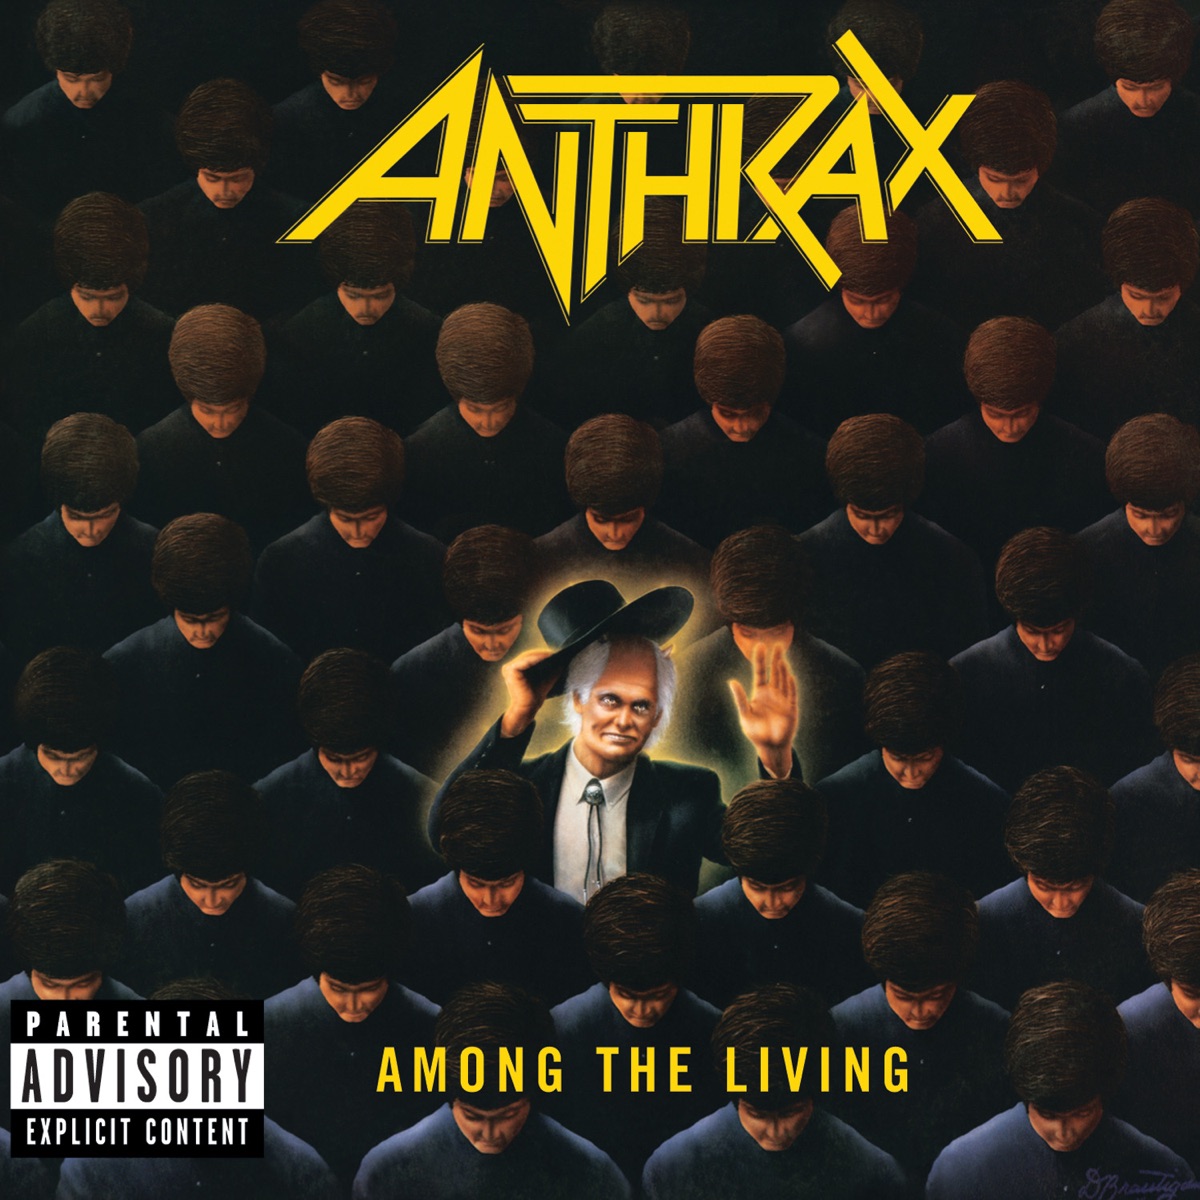 Worship Music by Anthrax on Apple Music